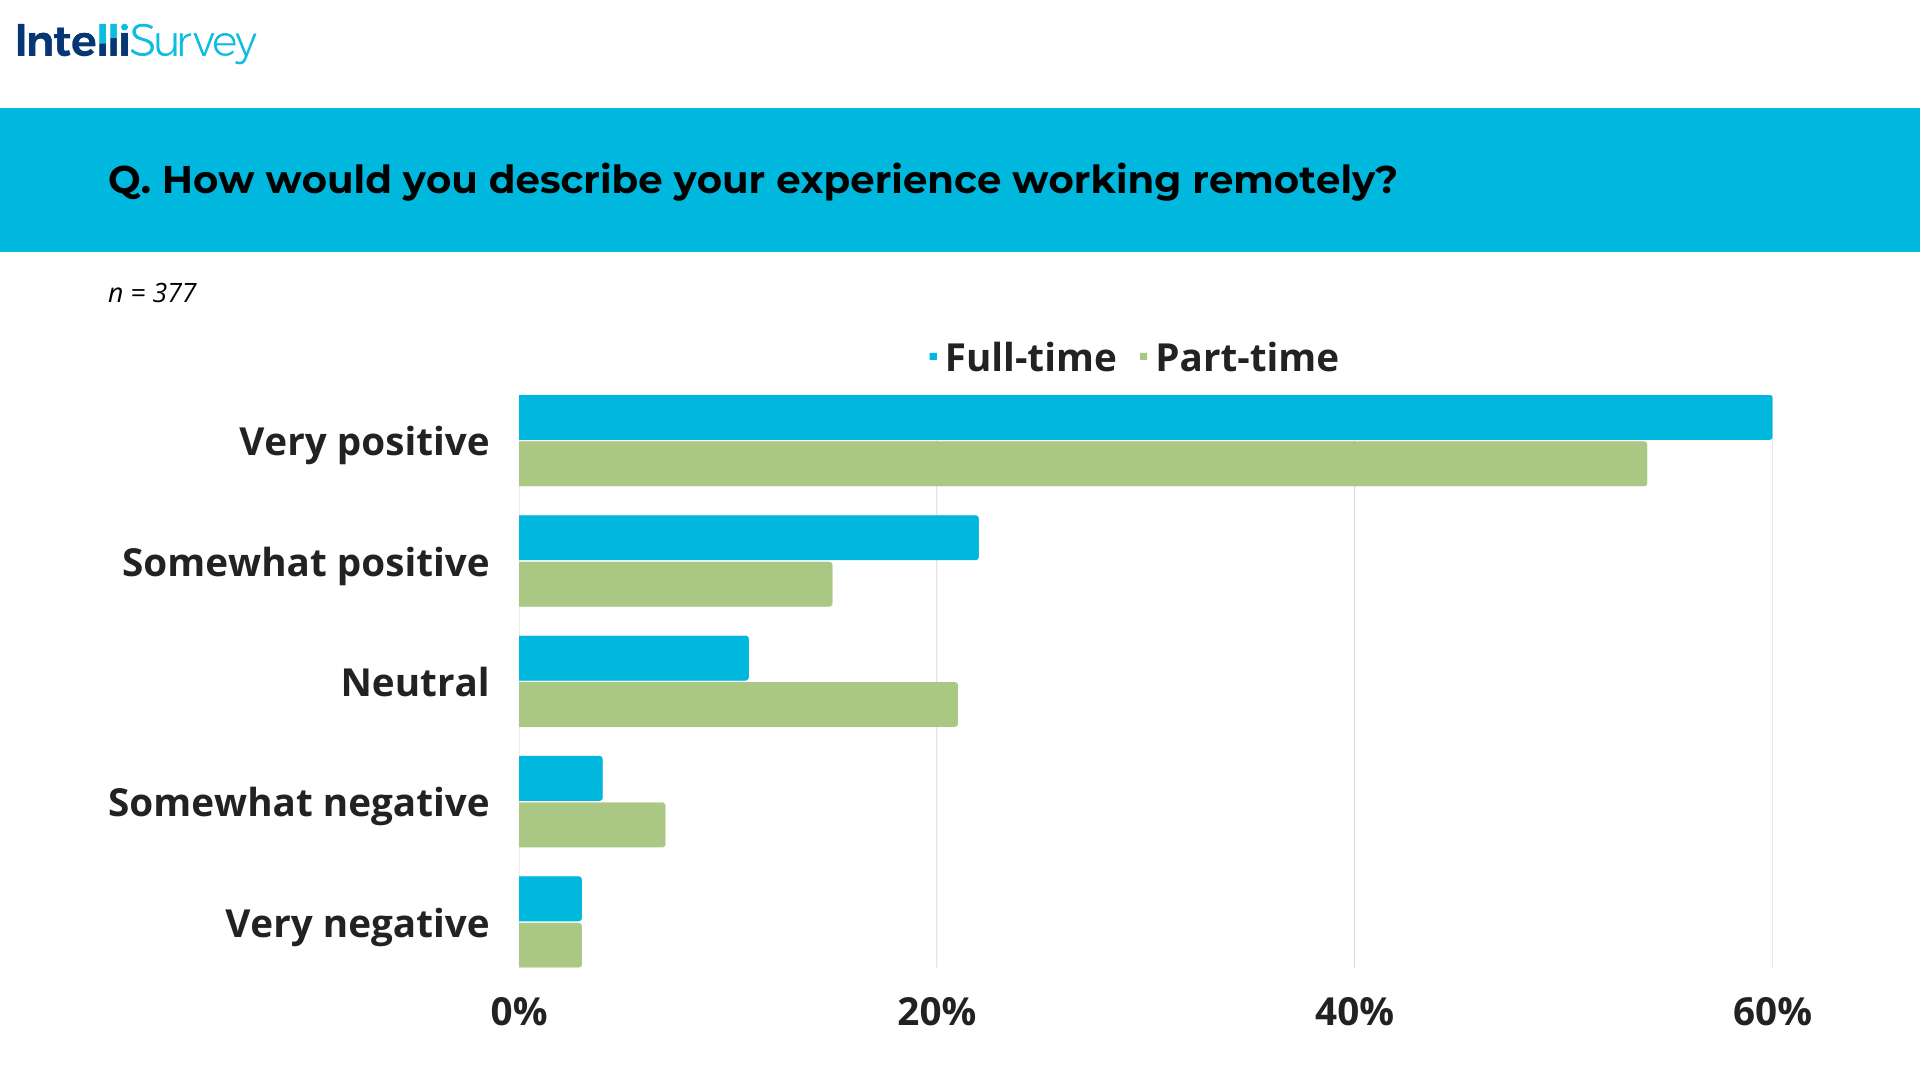 How would you describe your experience working remotely with chart